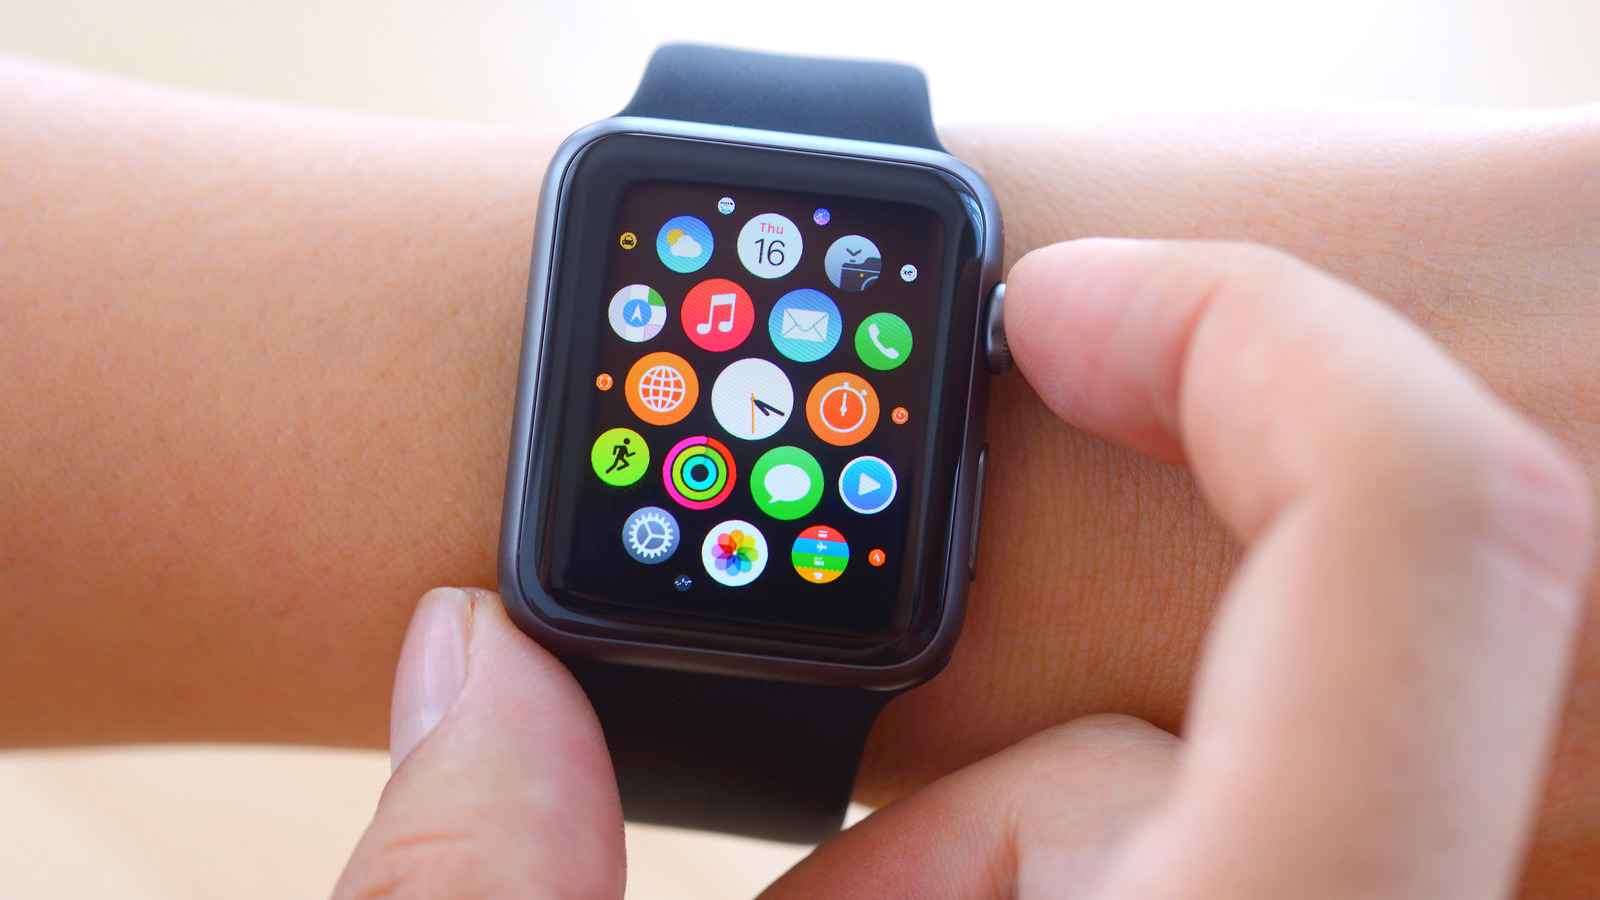 Can You Use An Apple Watch Without An iPhone? - SlashGear